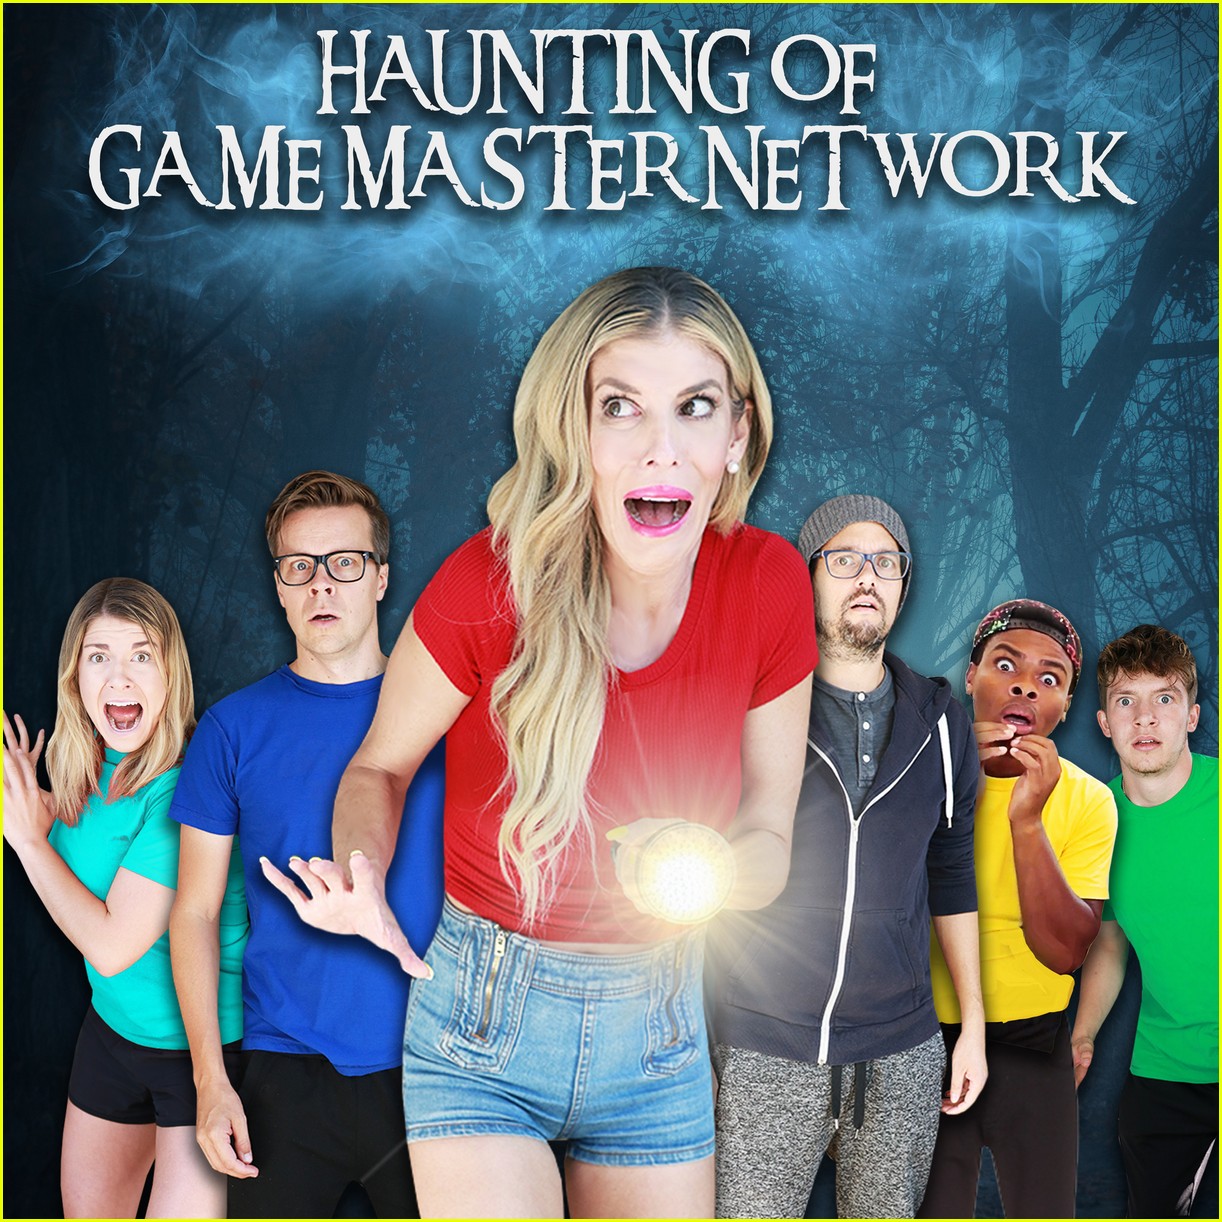 rebecca zamolo set to release game master movie watch the trailer exclusive 03.